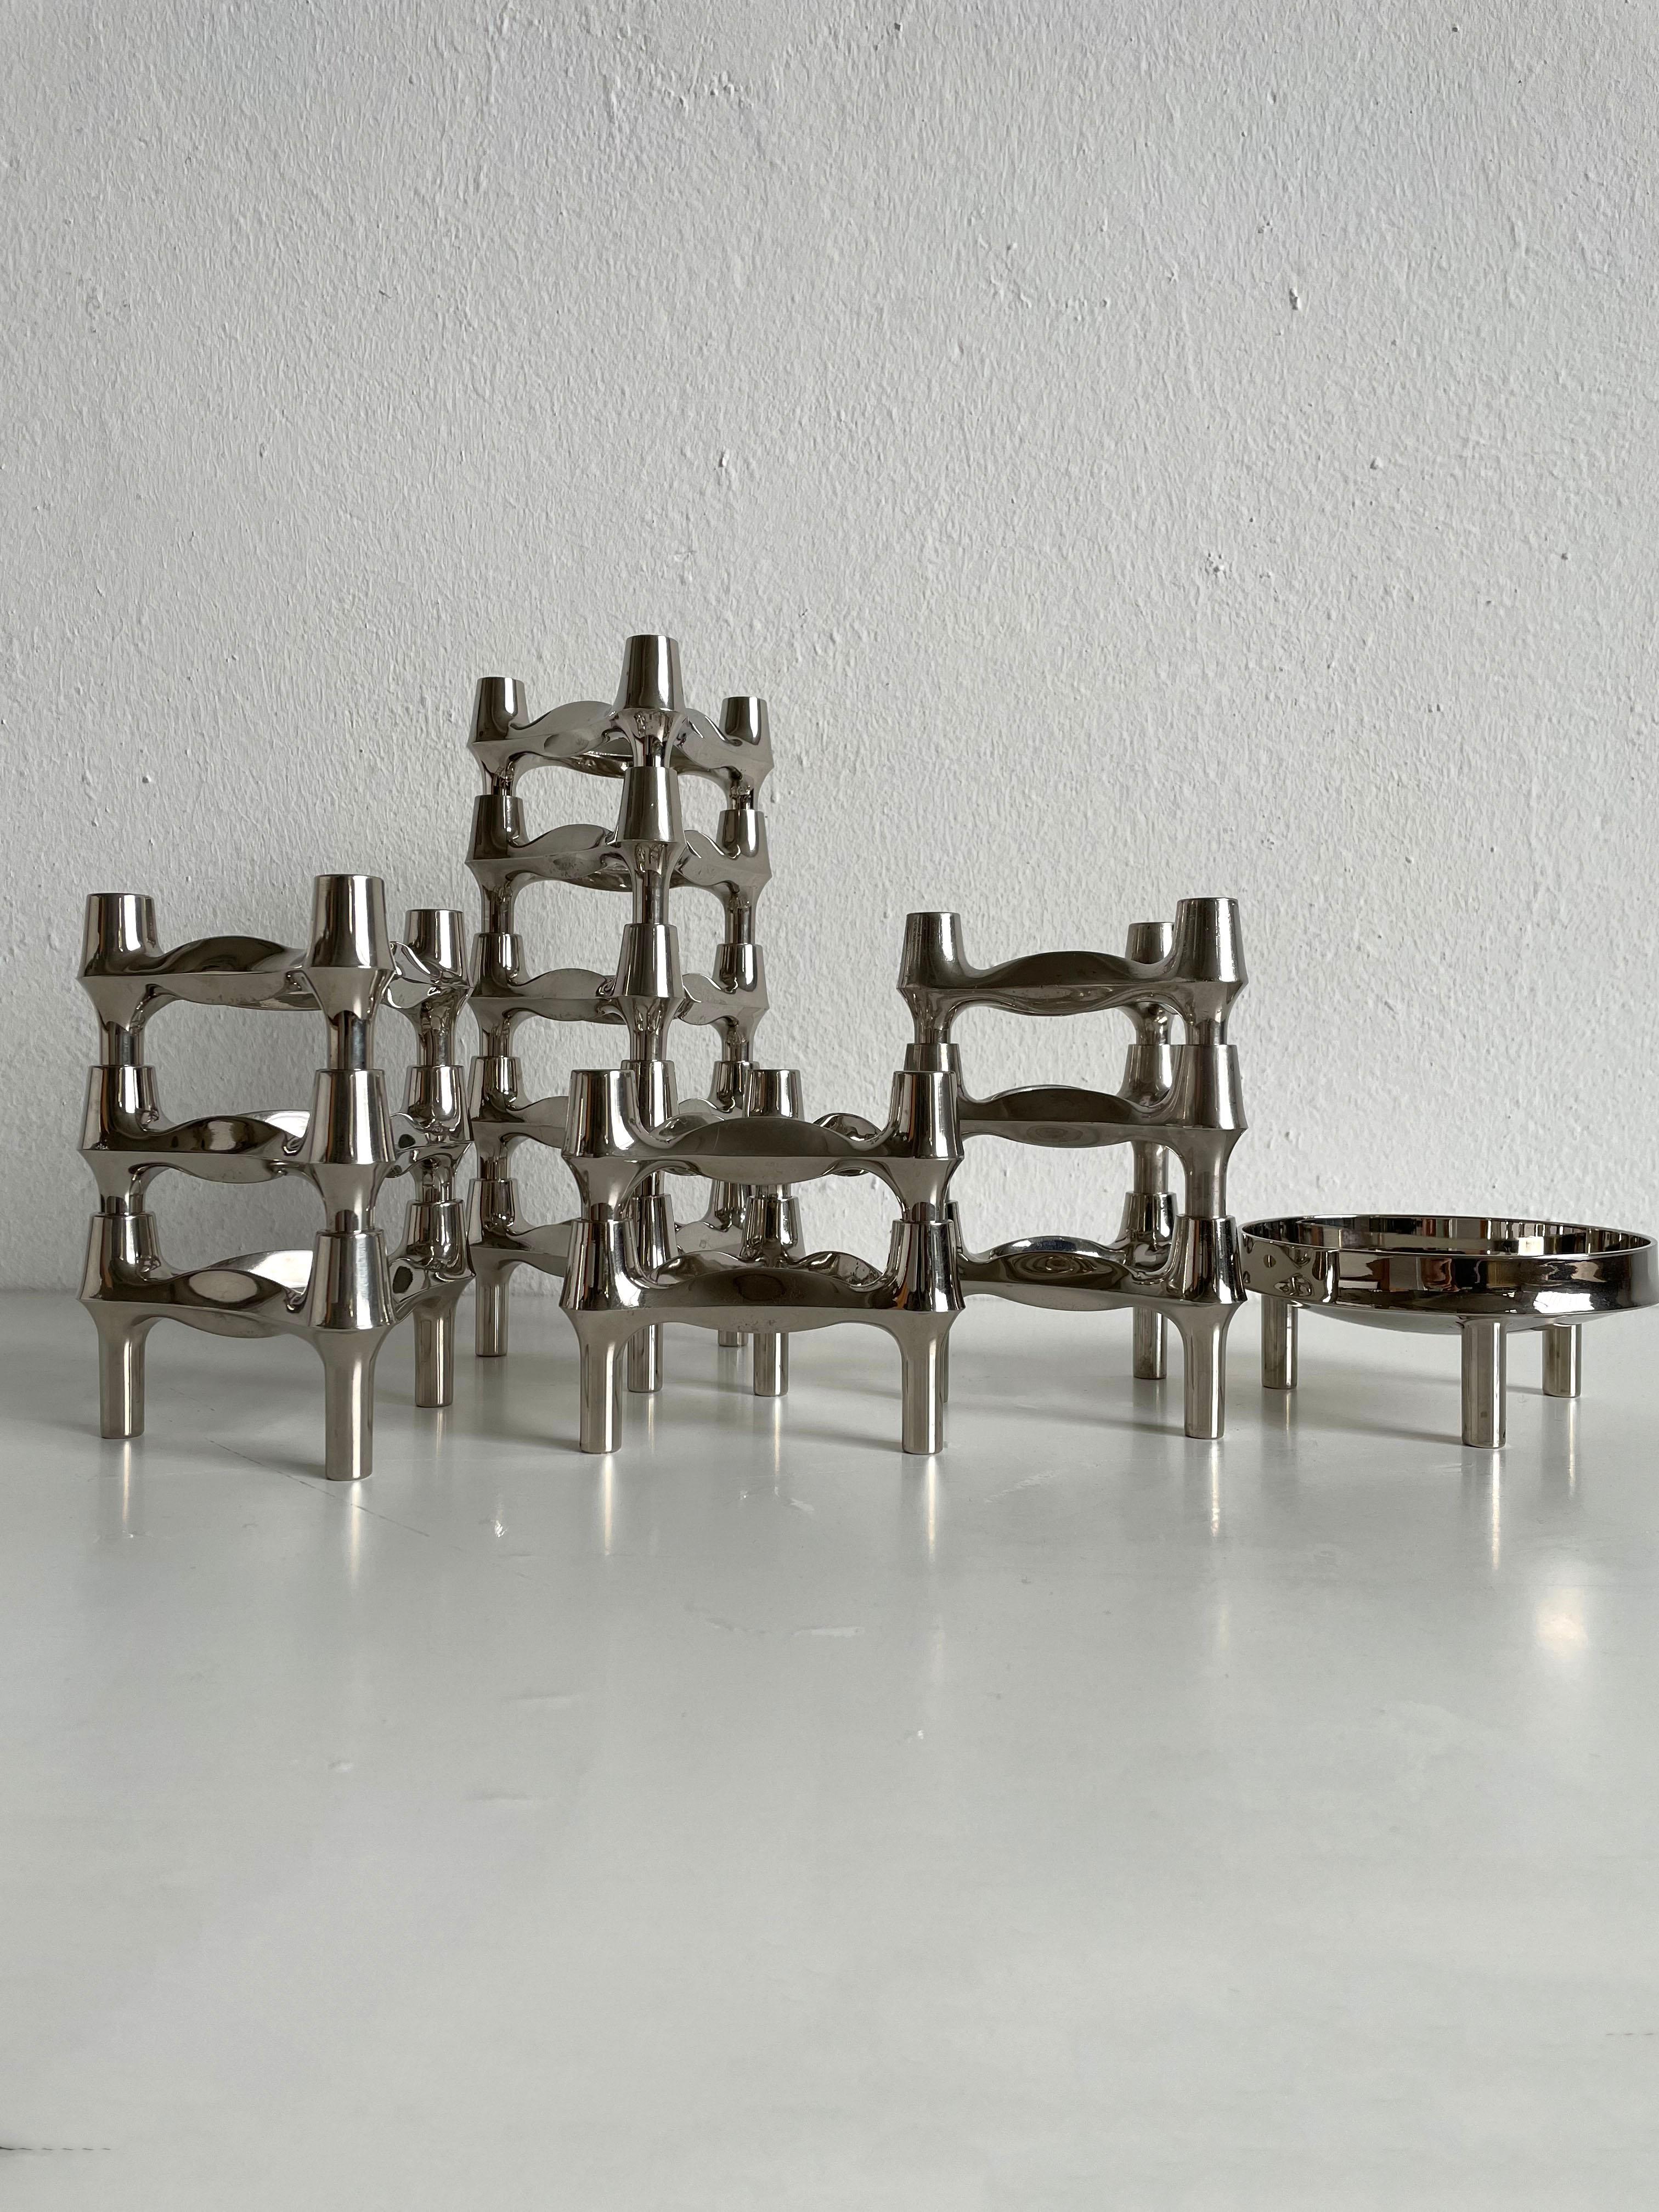 Metal Modular Candle Holder by Caesare Stoffi for BMF Nagel, 14 Pcs, Germany, 1970s